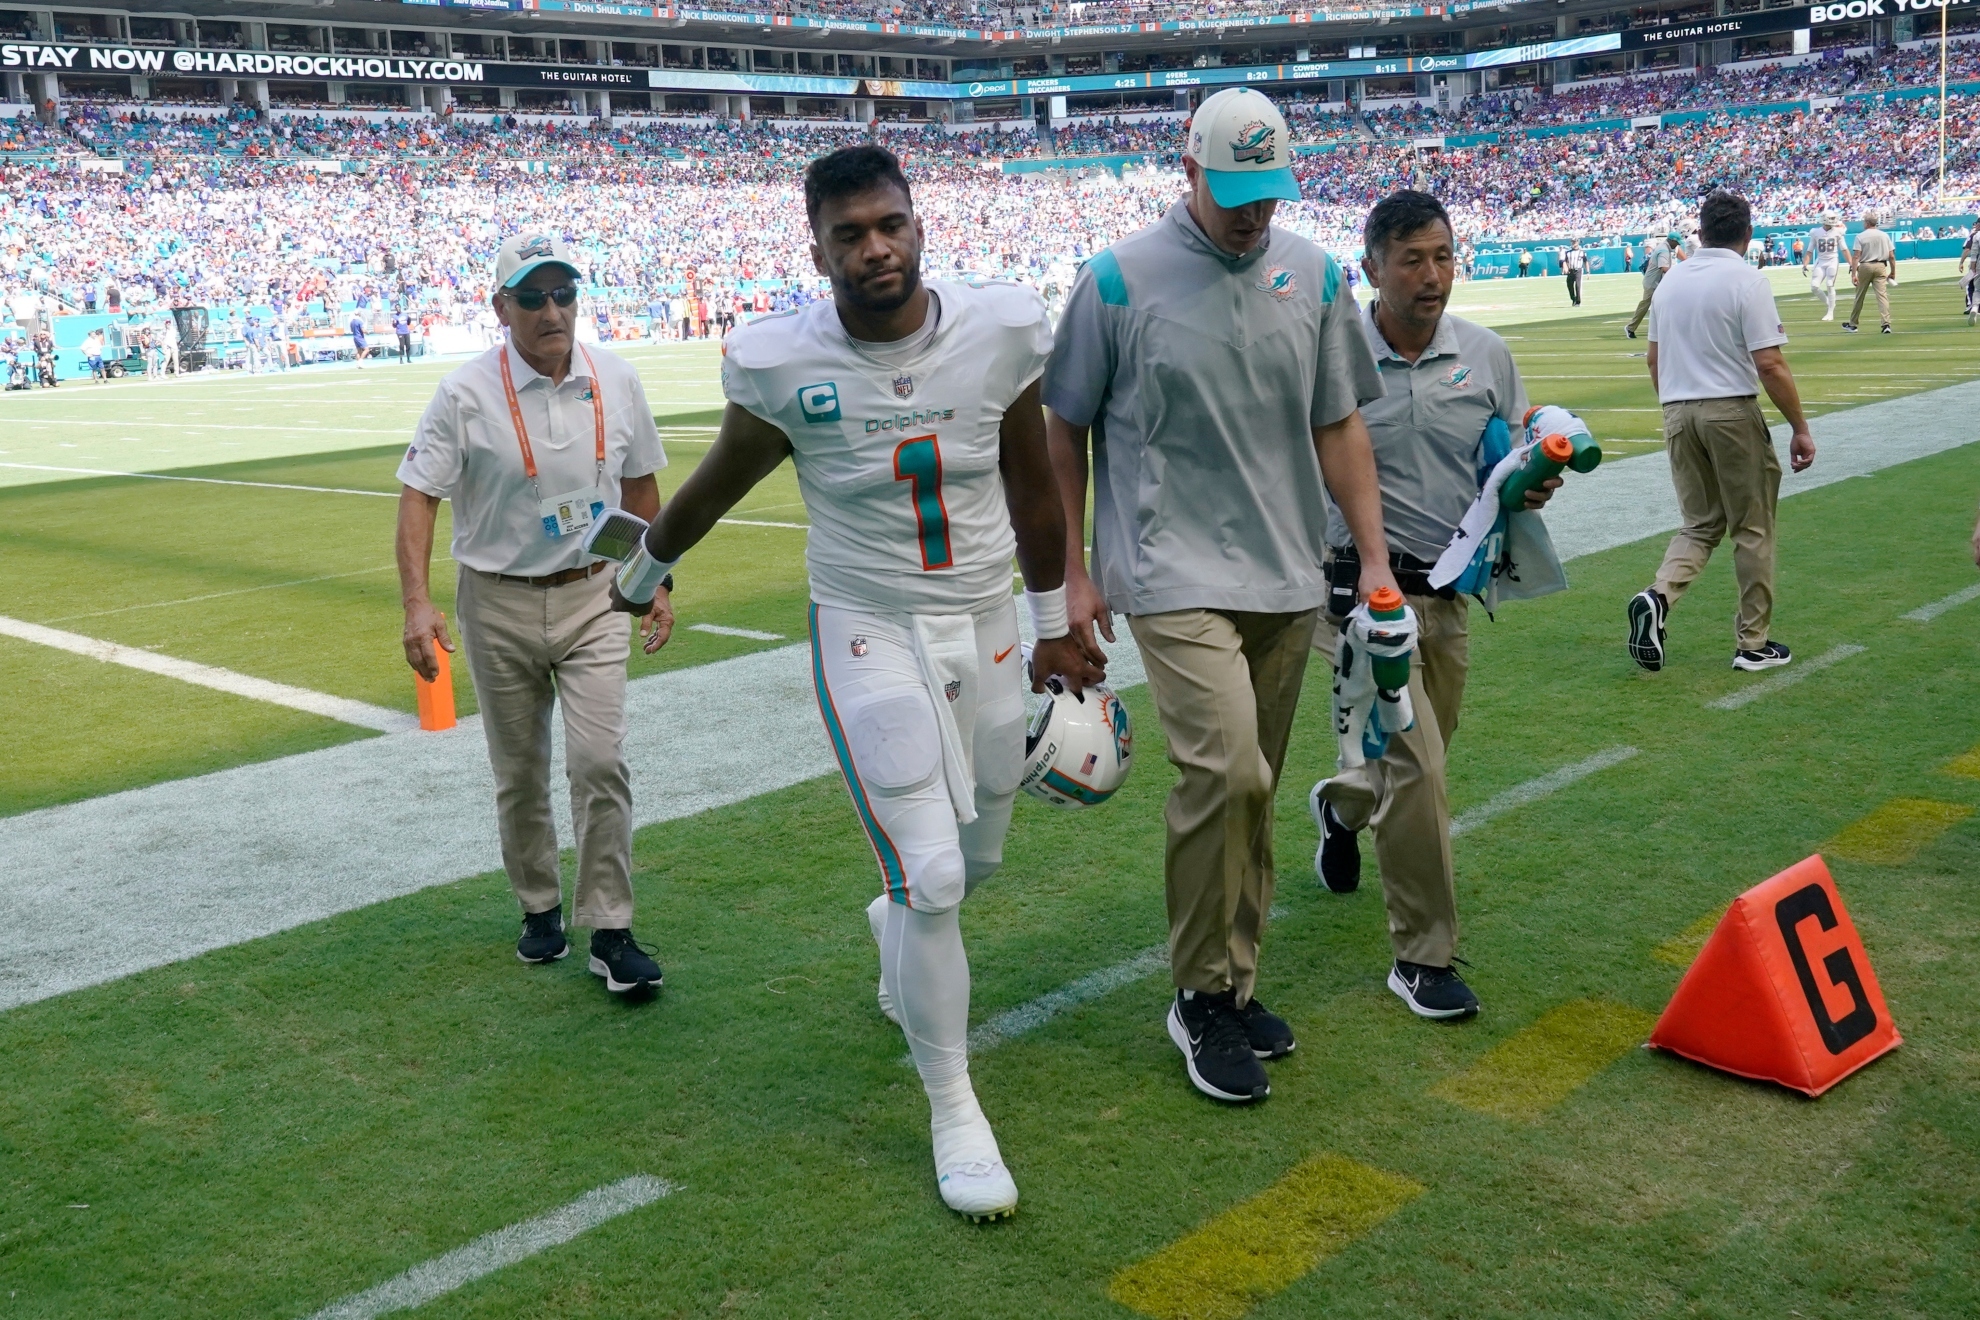 Miami Dolphins quarterback Tua Tagovailoa (1) is assisted off the field after he was injured during the first half of an NFL football game against the Buffalo Bills, Sunday, Sept. 25, 2022, in Miami Gardens, Fla / AP